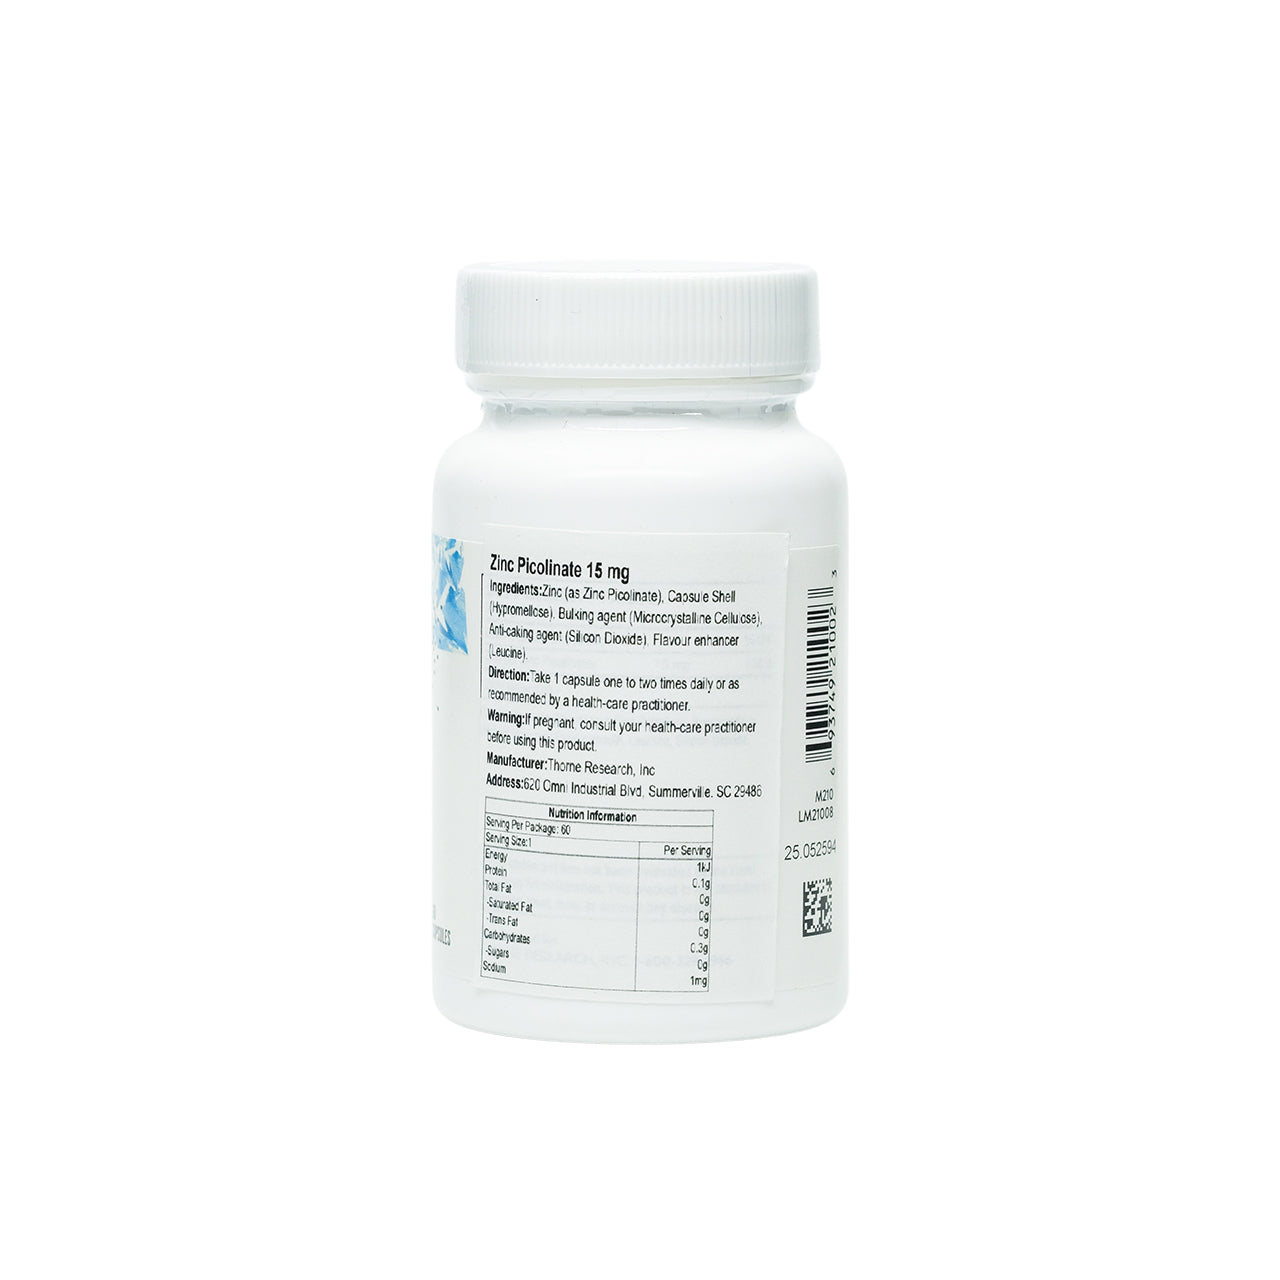 Thorne Zinc Picolinate 15 Mg 60 Tablets